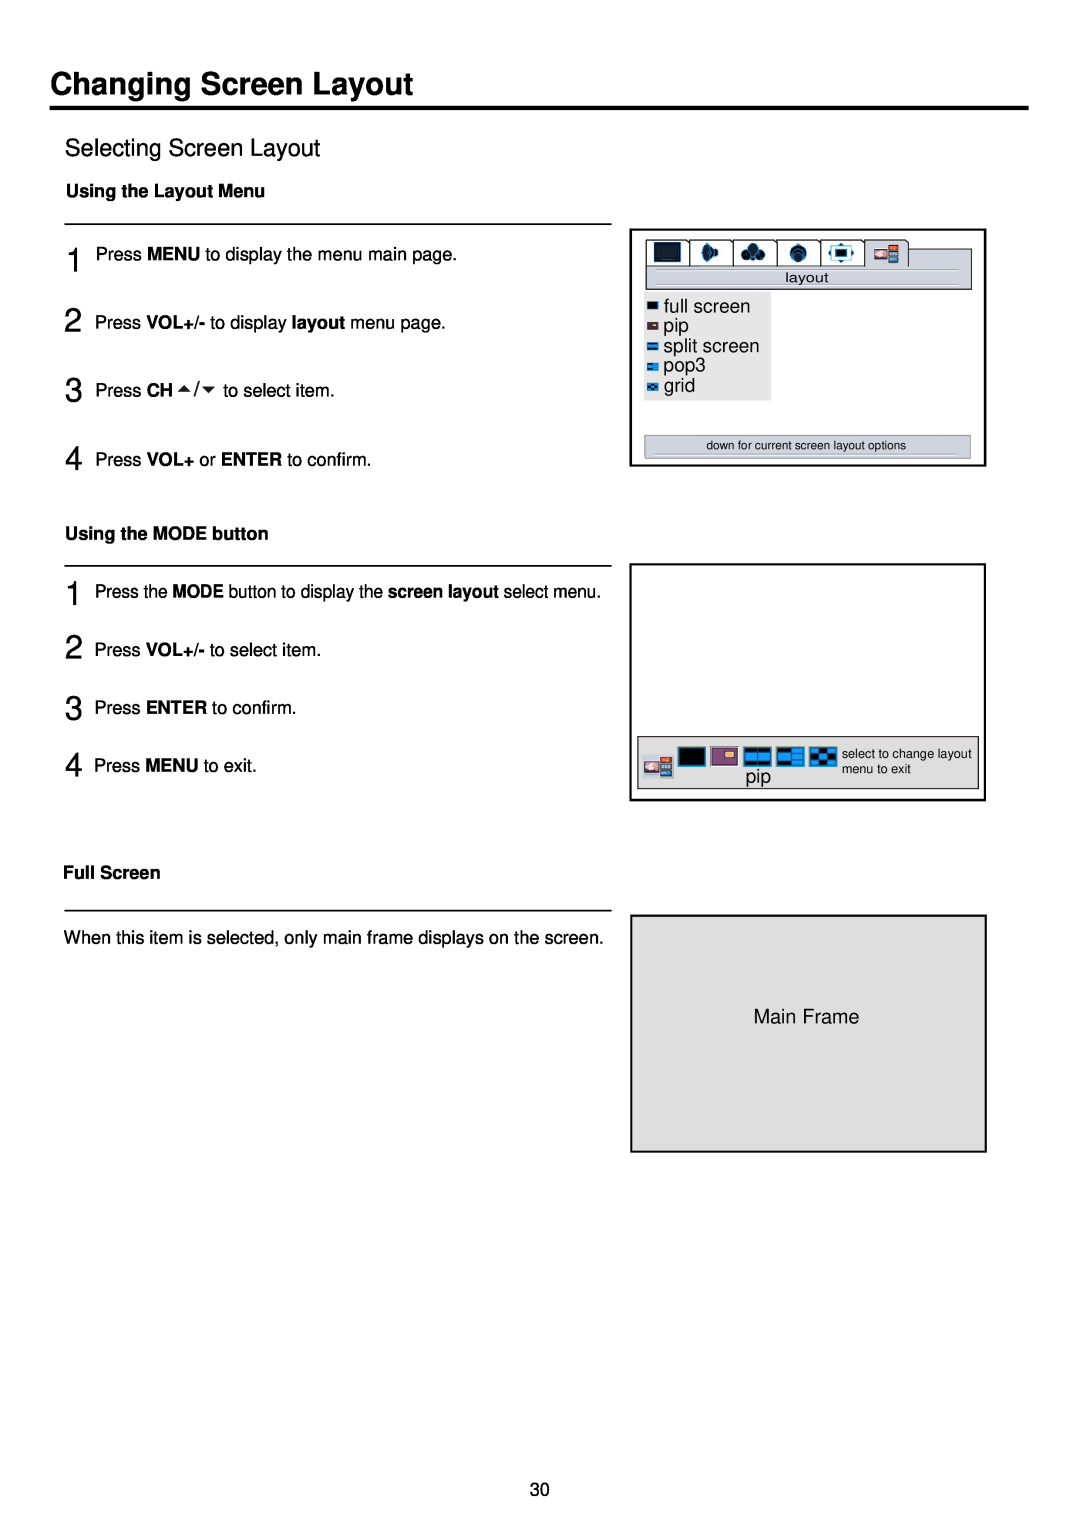 Palsonic PDP4200 owner manual Changing Screen Layout, Selecting Screen Layout, Using the Layout Menu, Using the MODE button 